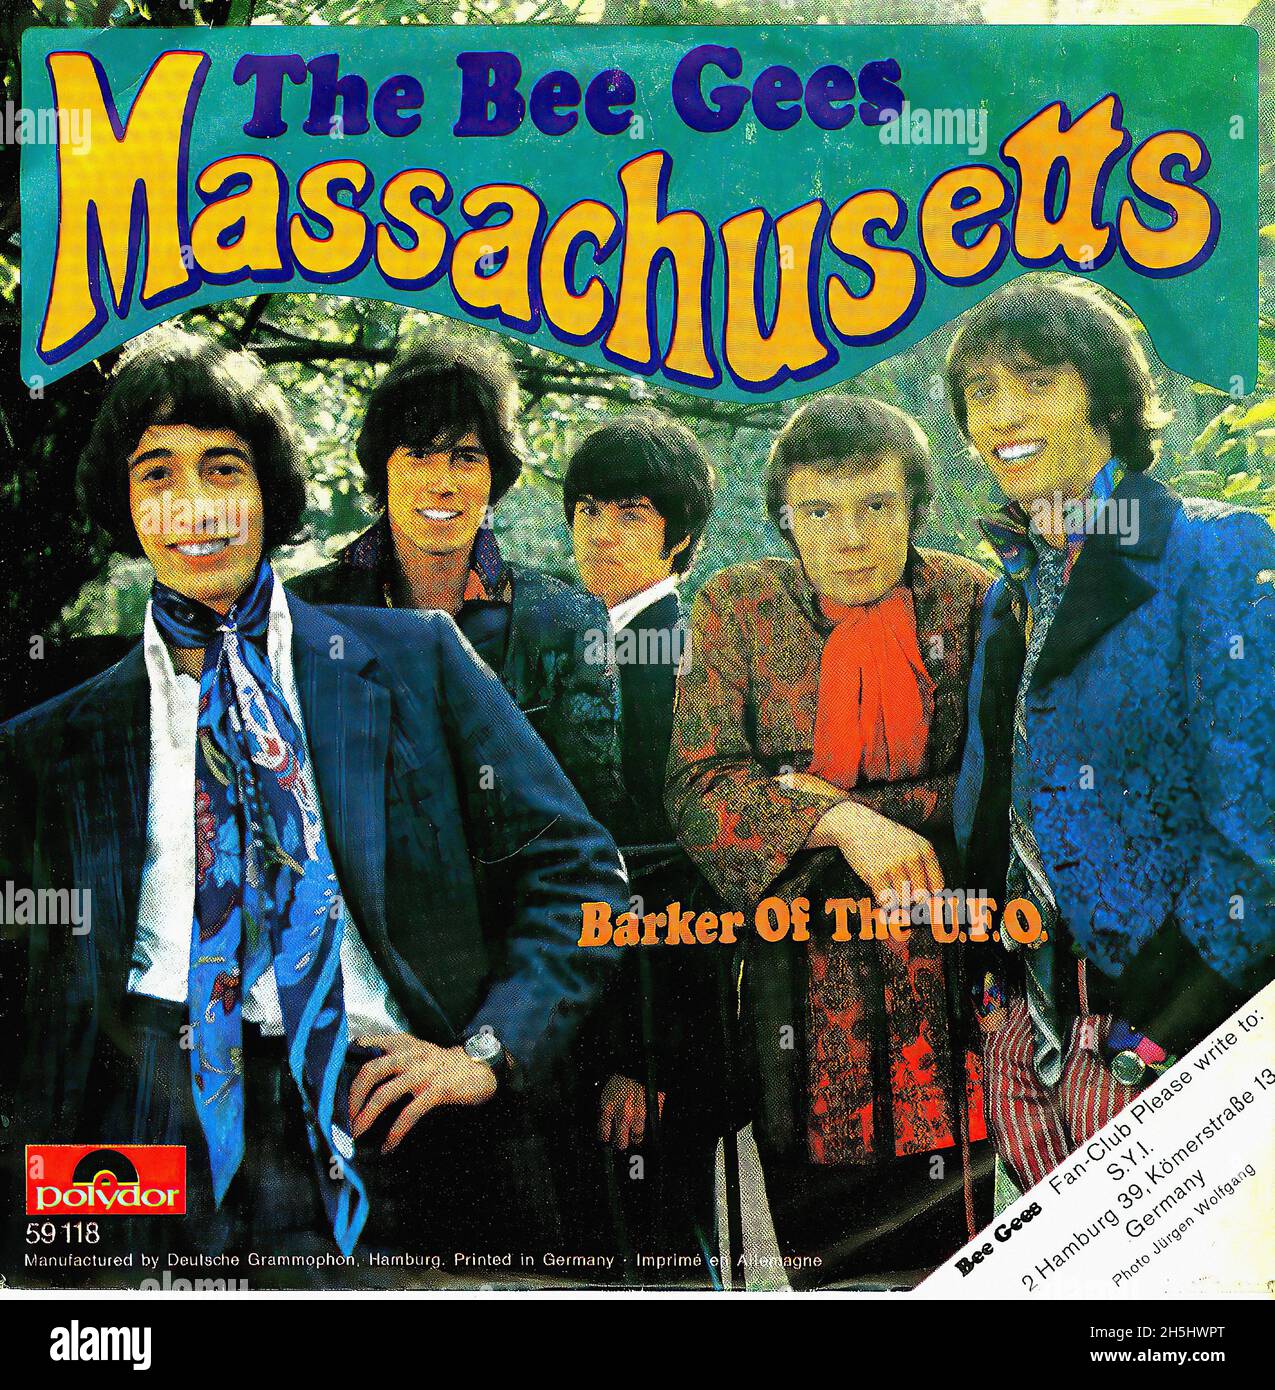 Vintage Single Record Cover - Bee Gees, The - Massachusetts - D - 1967 02  Stockfotografie - Alamy